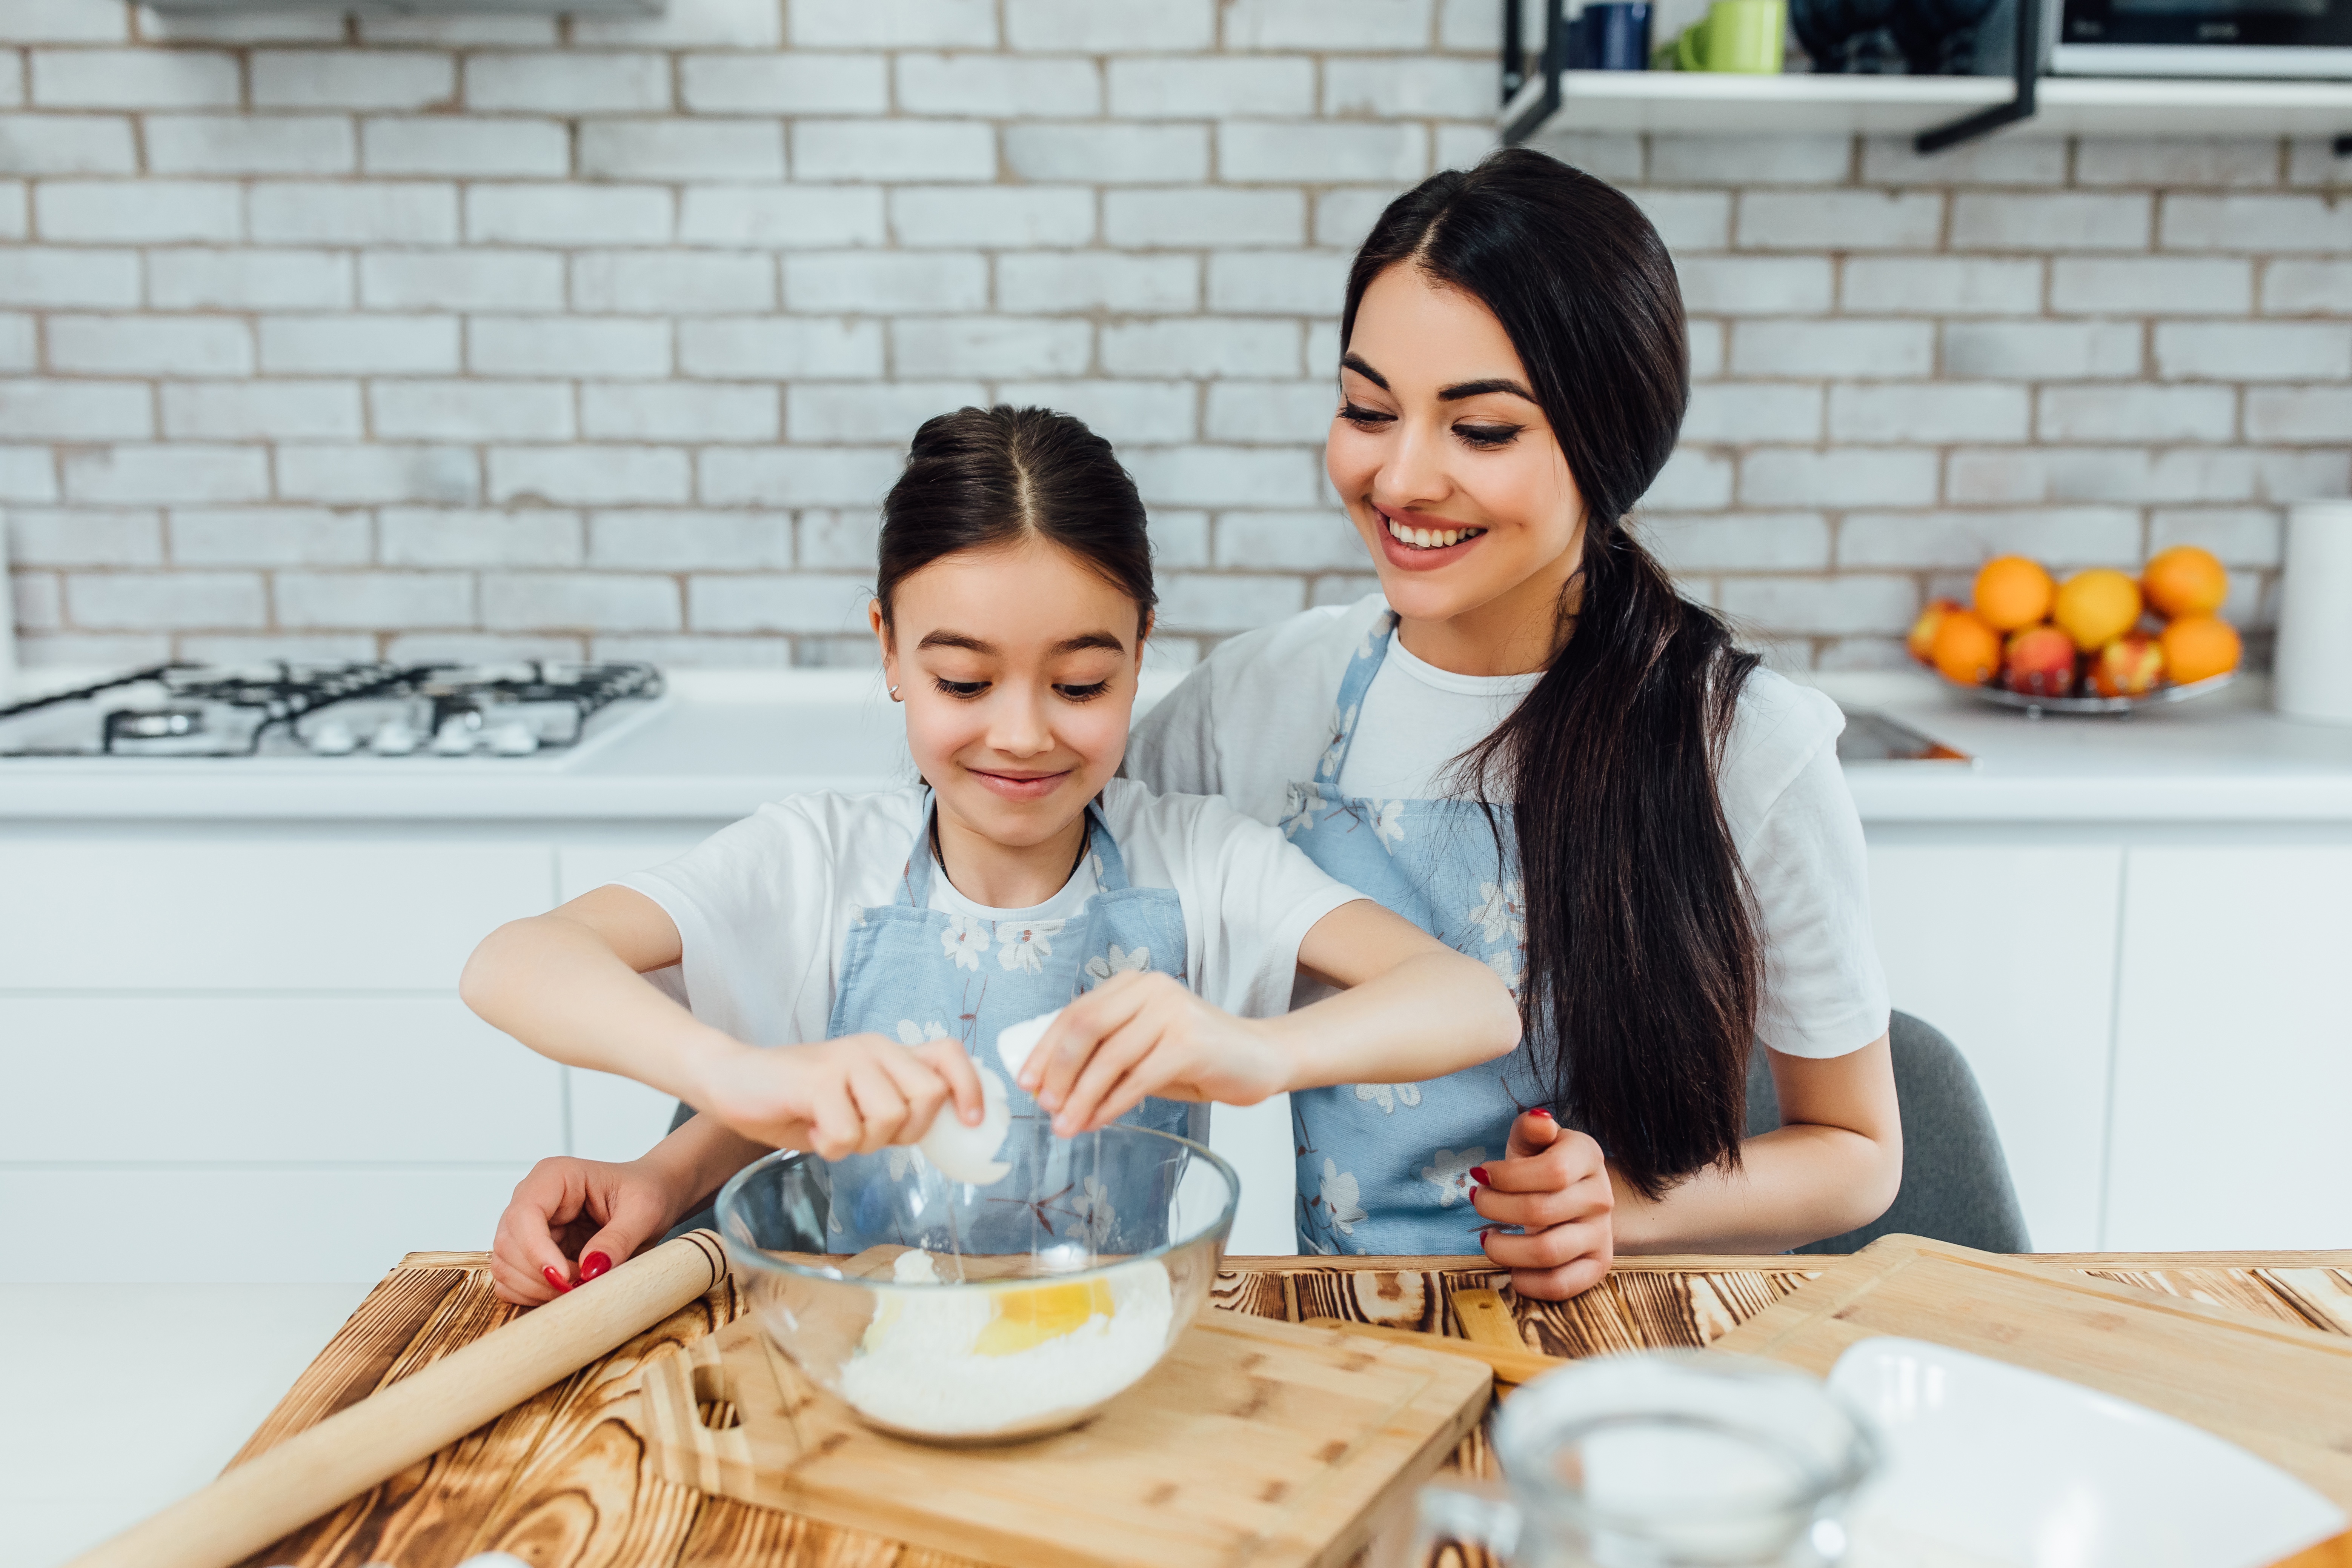 How Learning Cooking As An Adolescent Improves Long-Term Health